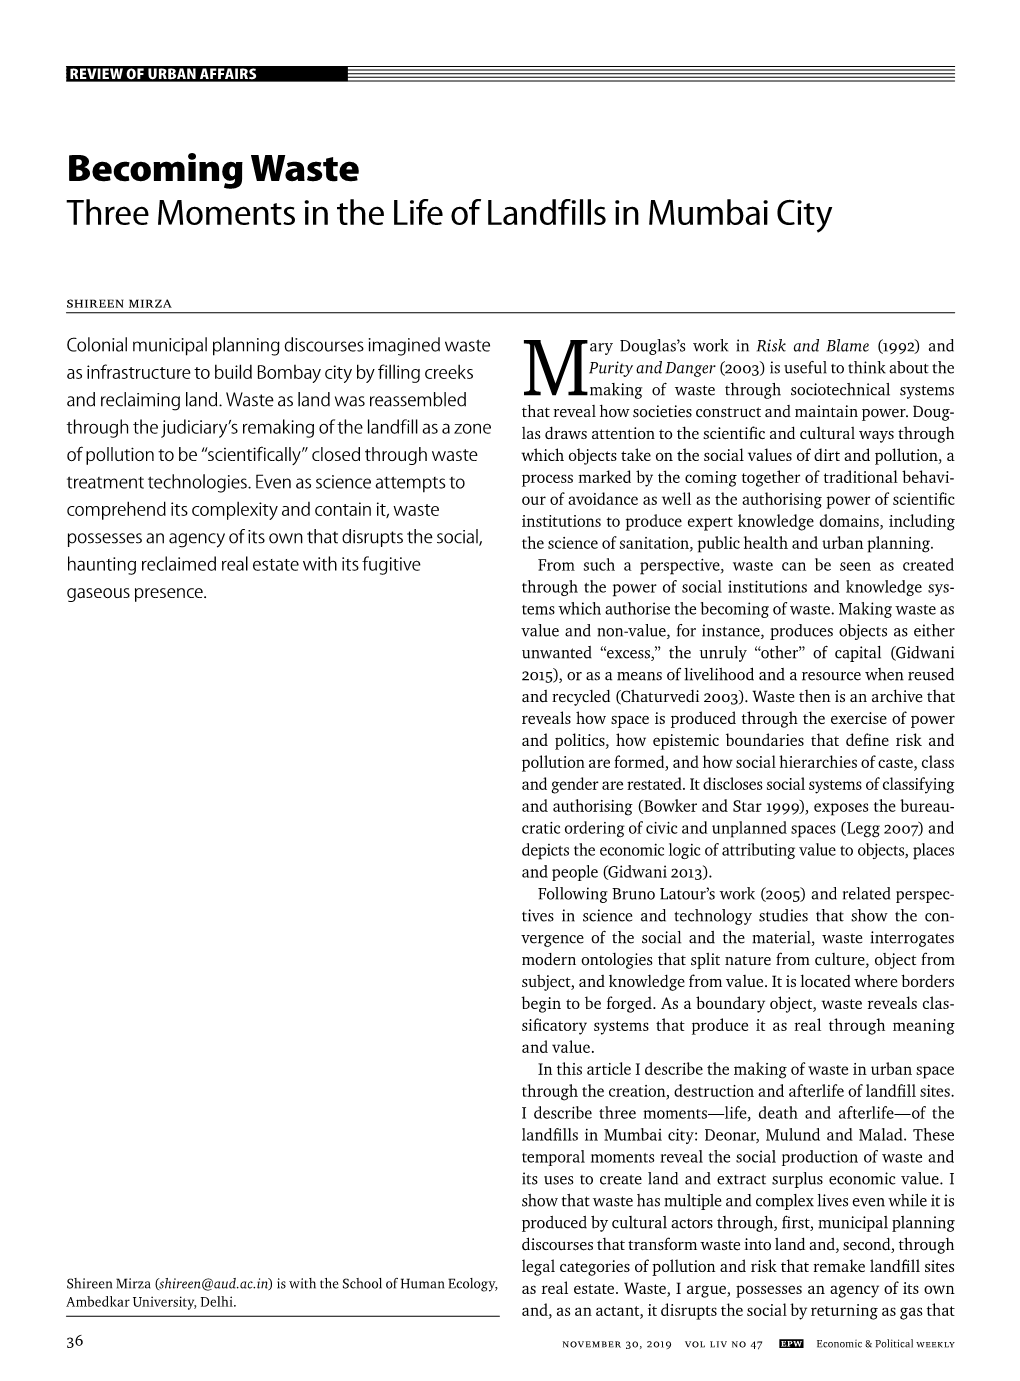 Becoming Waste Three Moments in the Life of Landfills in Mumbai City